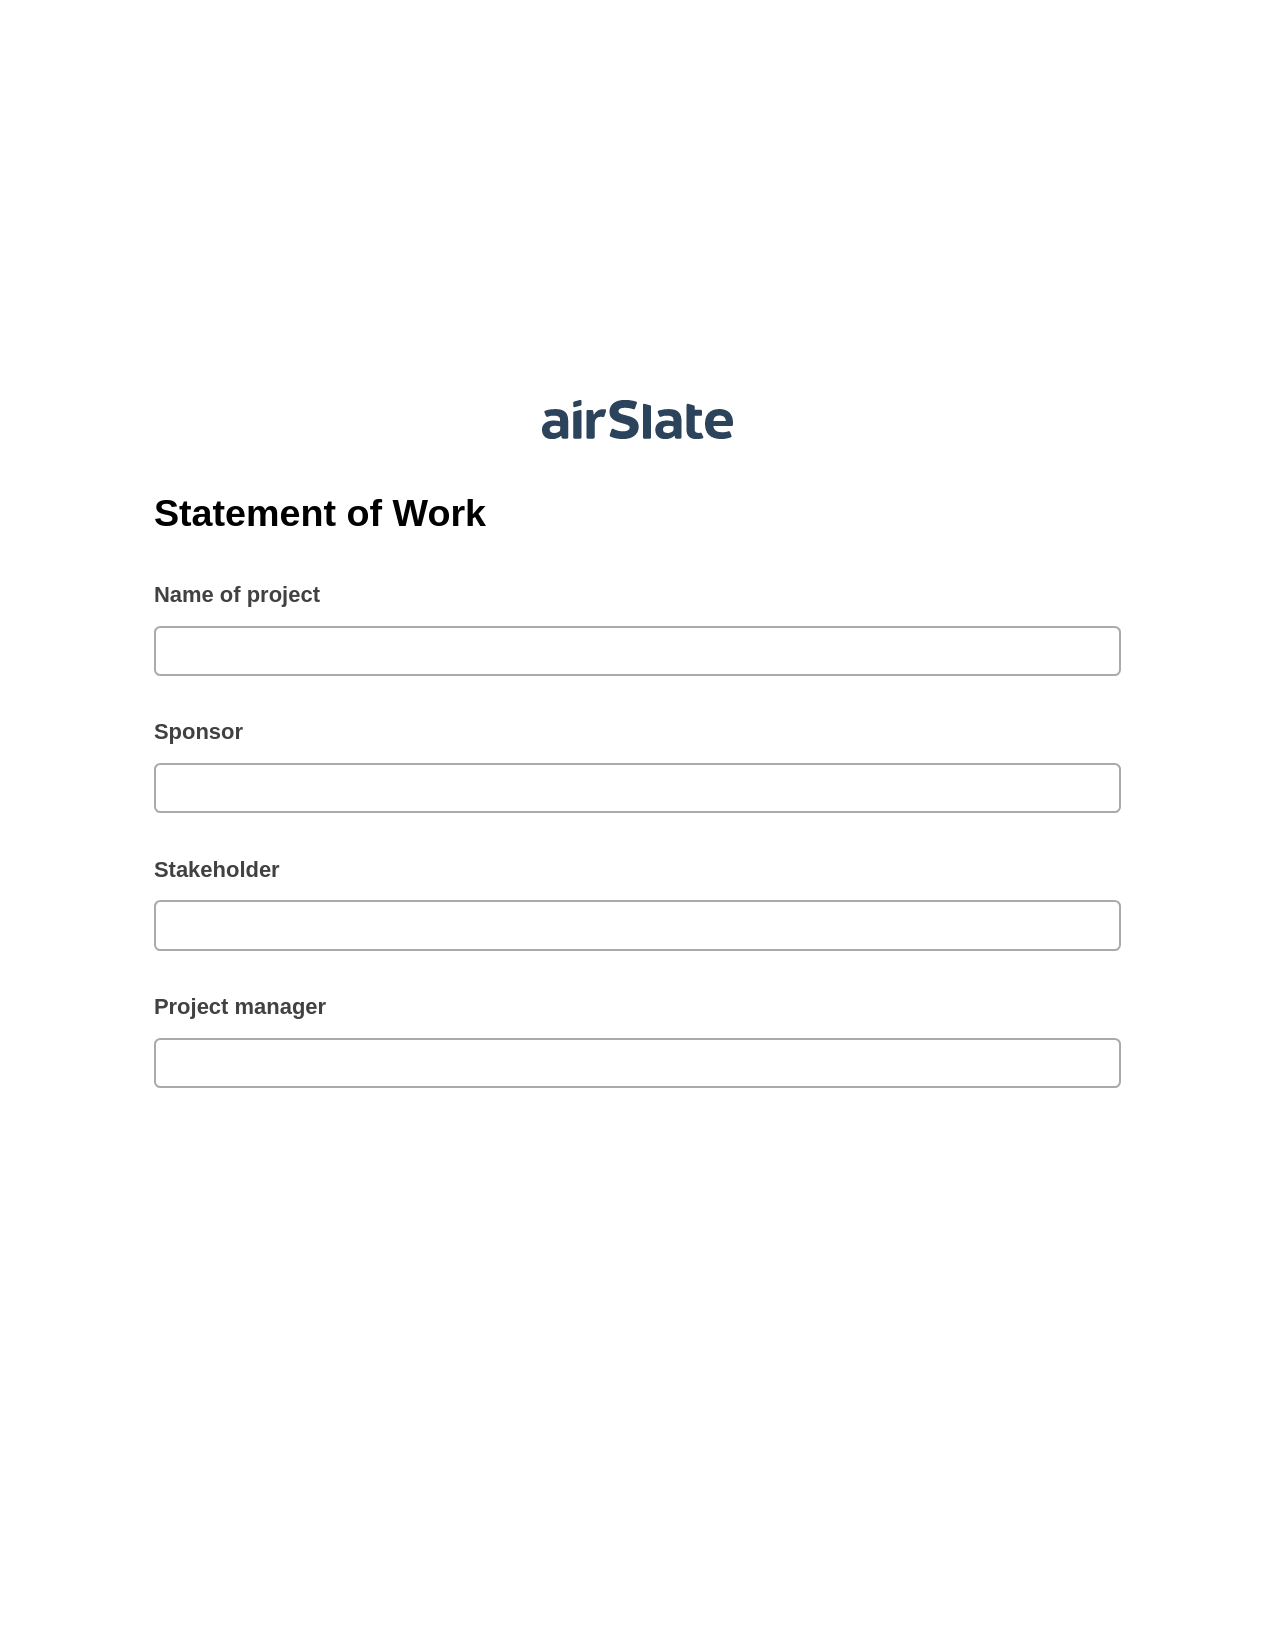 Statement of Work Pre-fill Document Bot, System Bot - Create a Slate in another Flow, Webhook Postfinish Bot